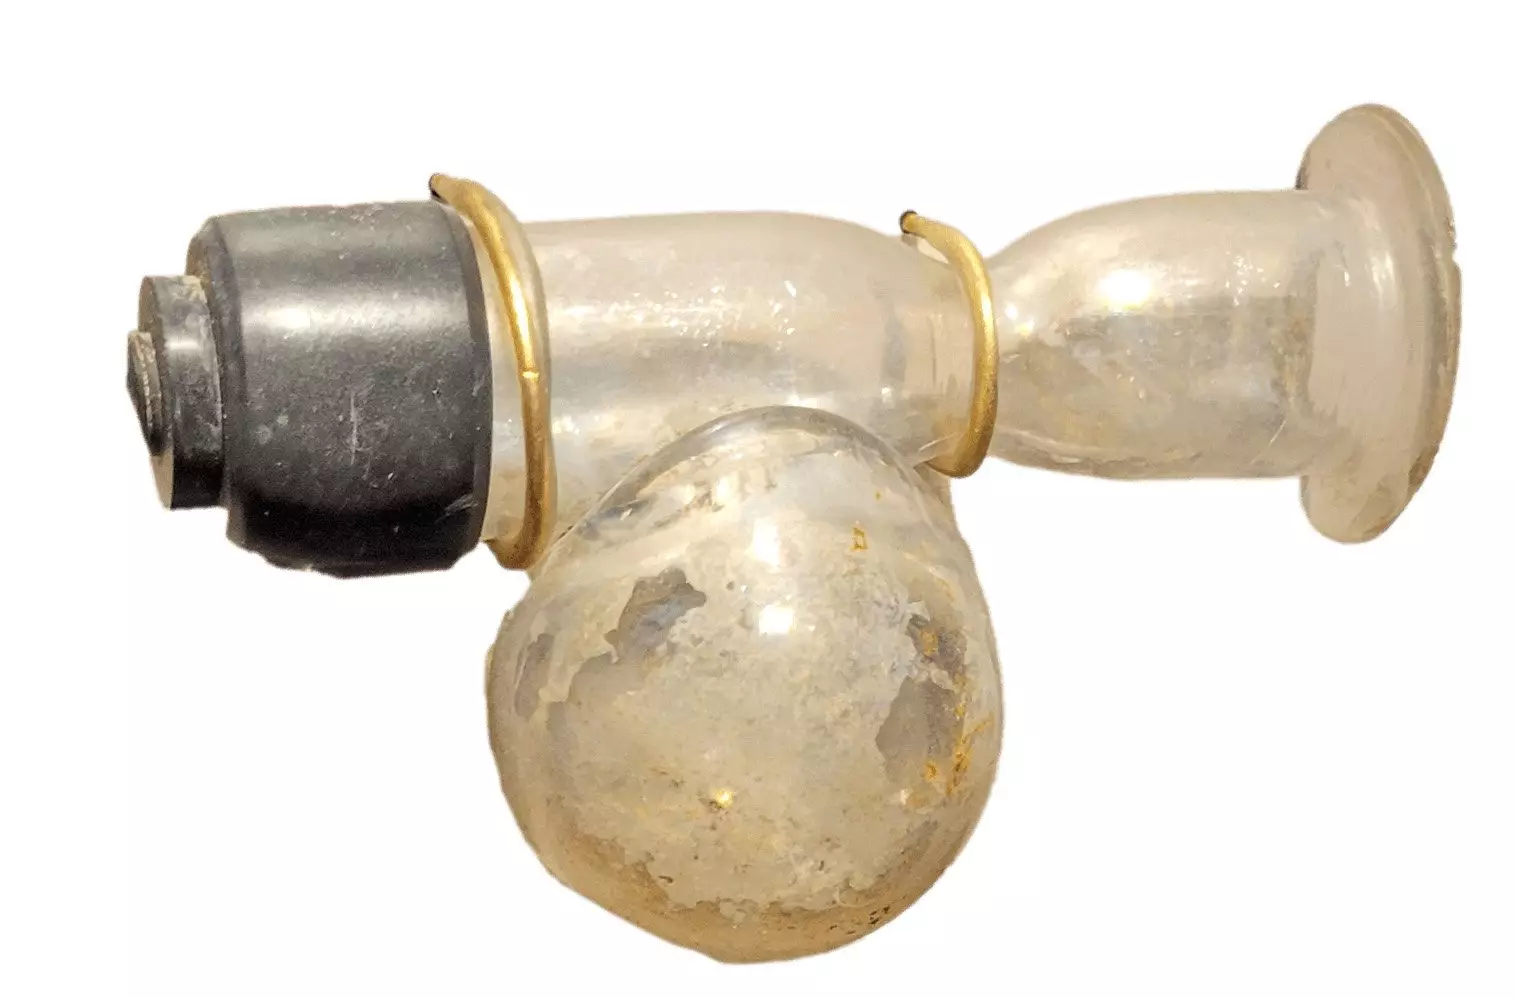 Glass tube with a metal end on the left side. There is a round bulb at the bottom.